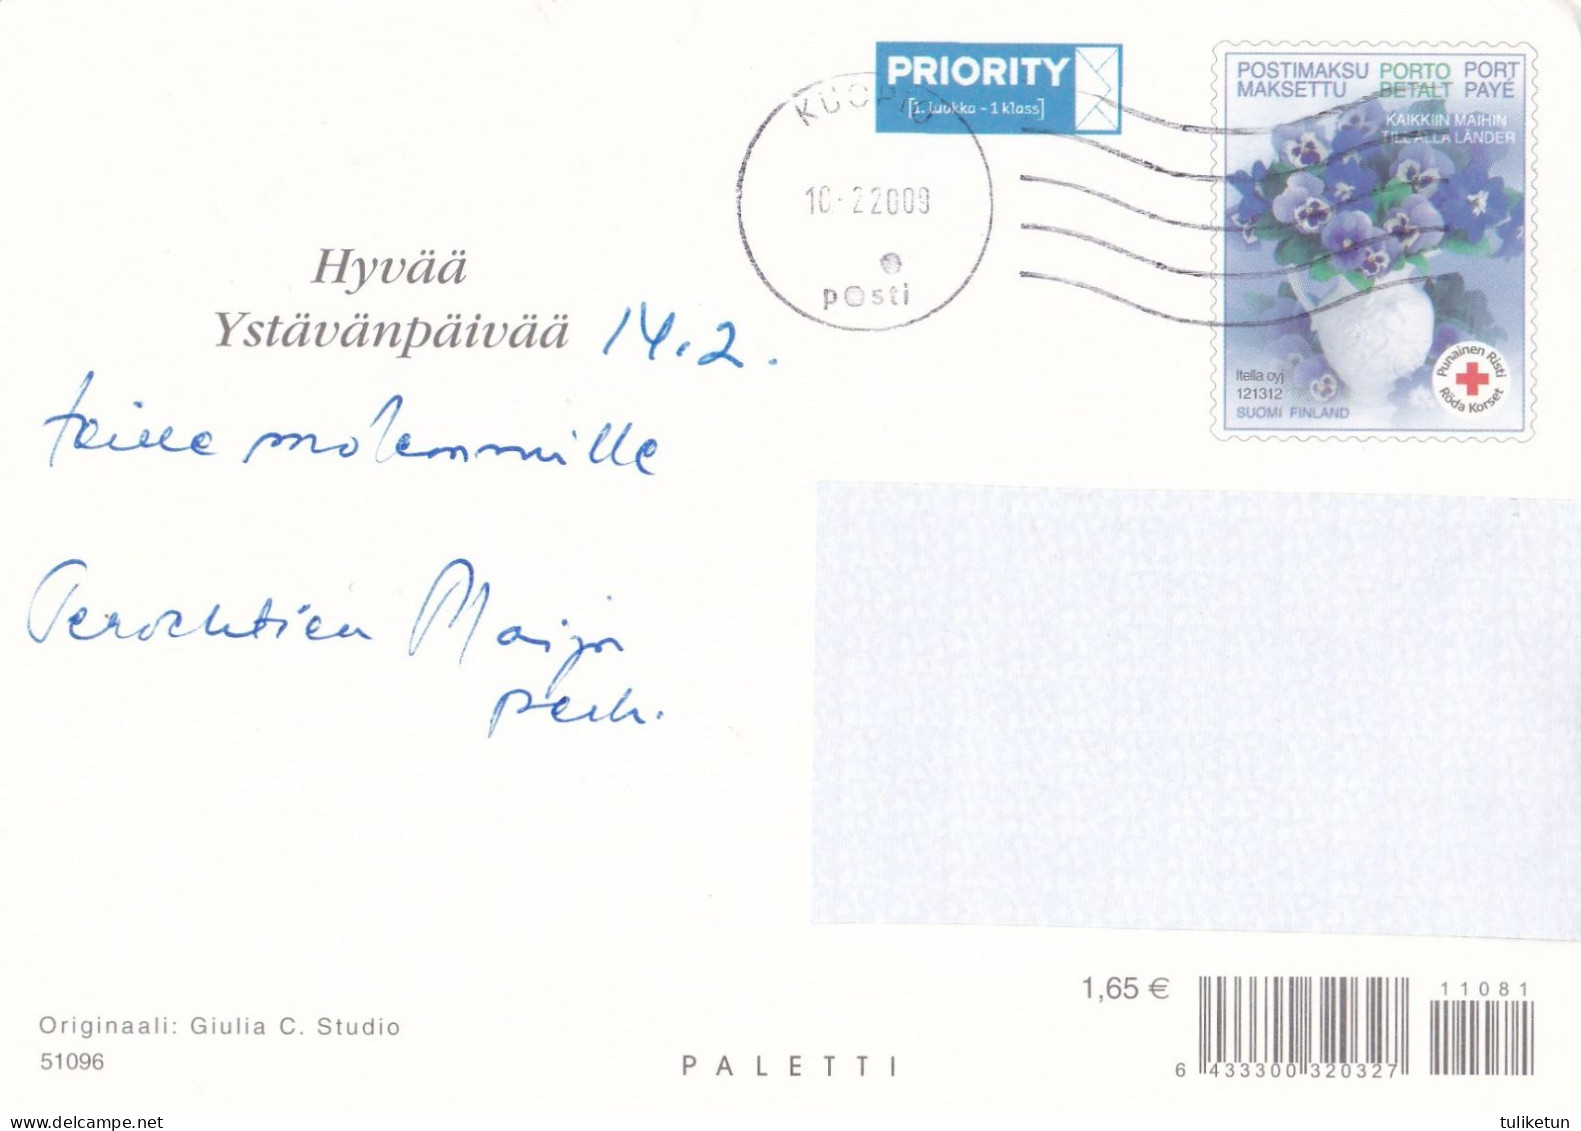 Postal Stationery - Beautiful Flowers - Red Cross - Suomi Finland 2009 - Postage Paid - Postal Stationery